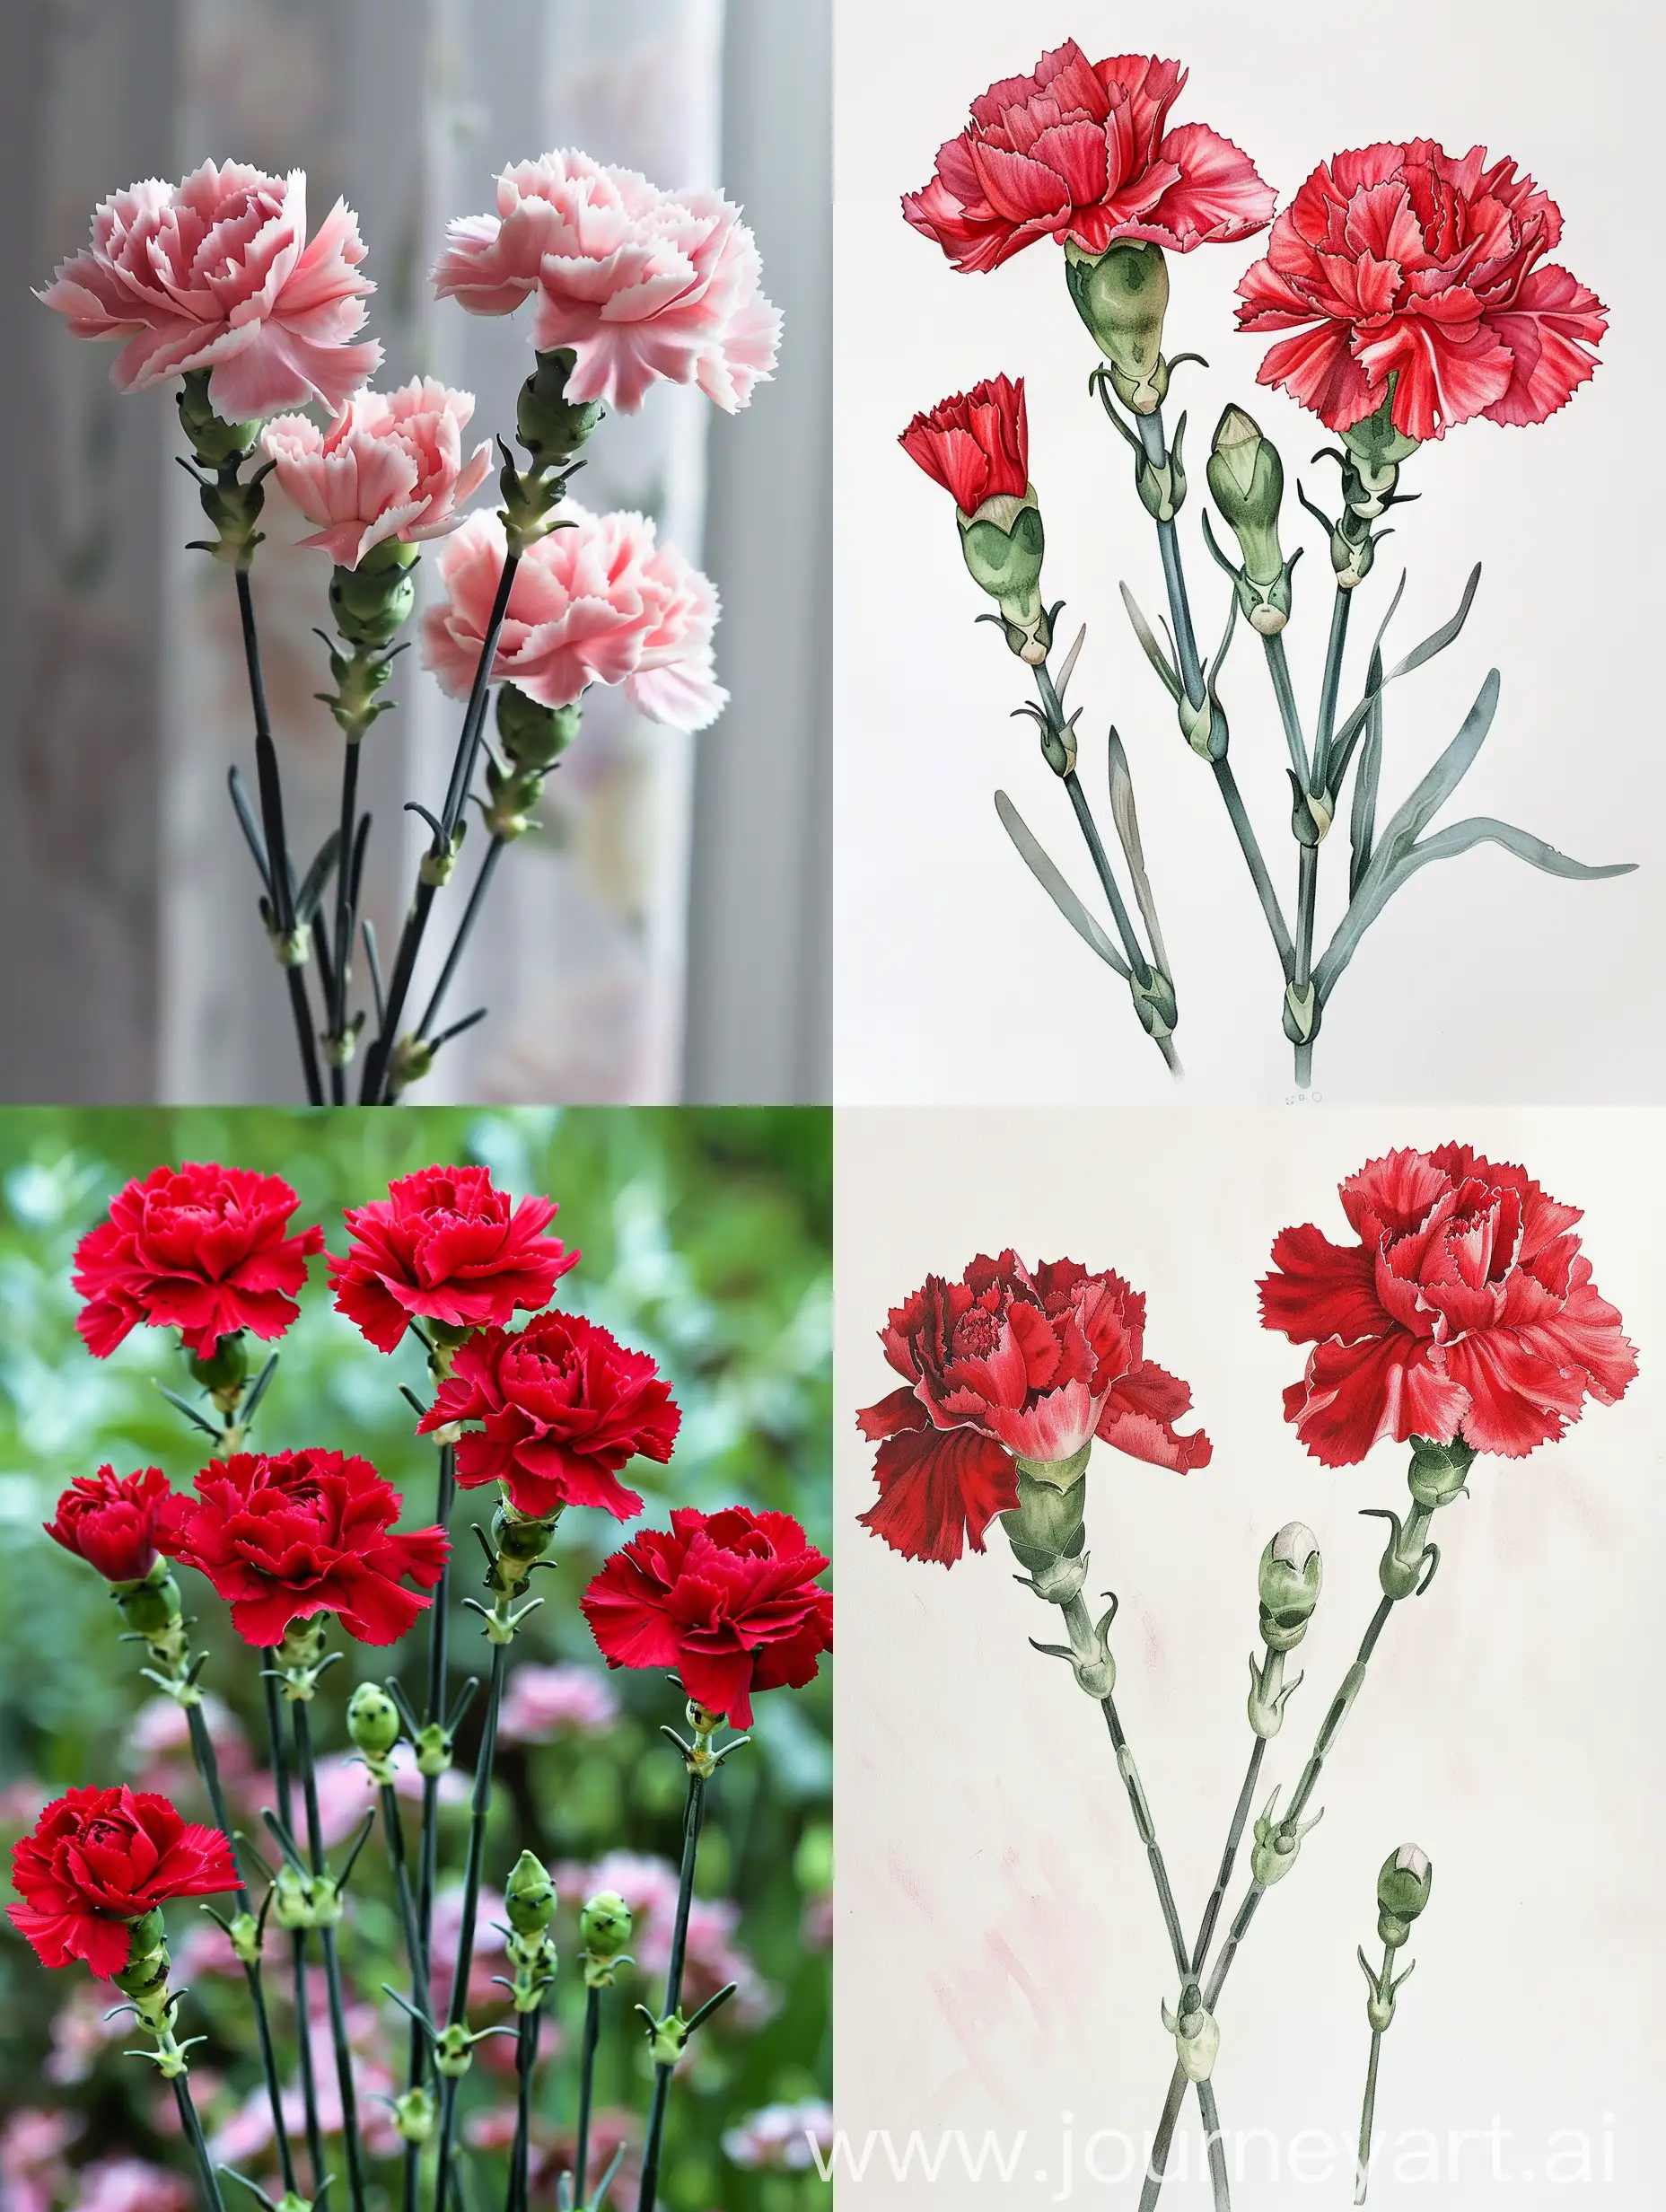 Vibrant-Carnation-Flowers-in-a-34-Aspect-Ratio-Composition